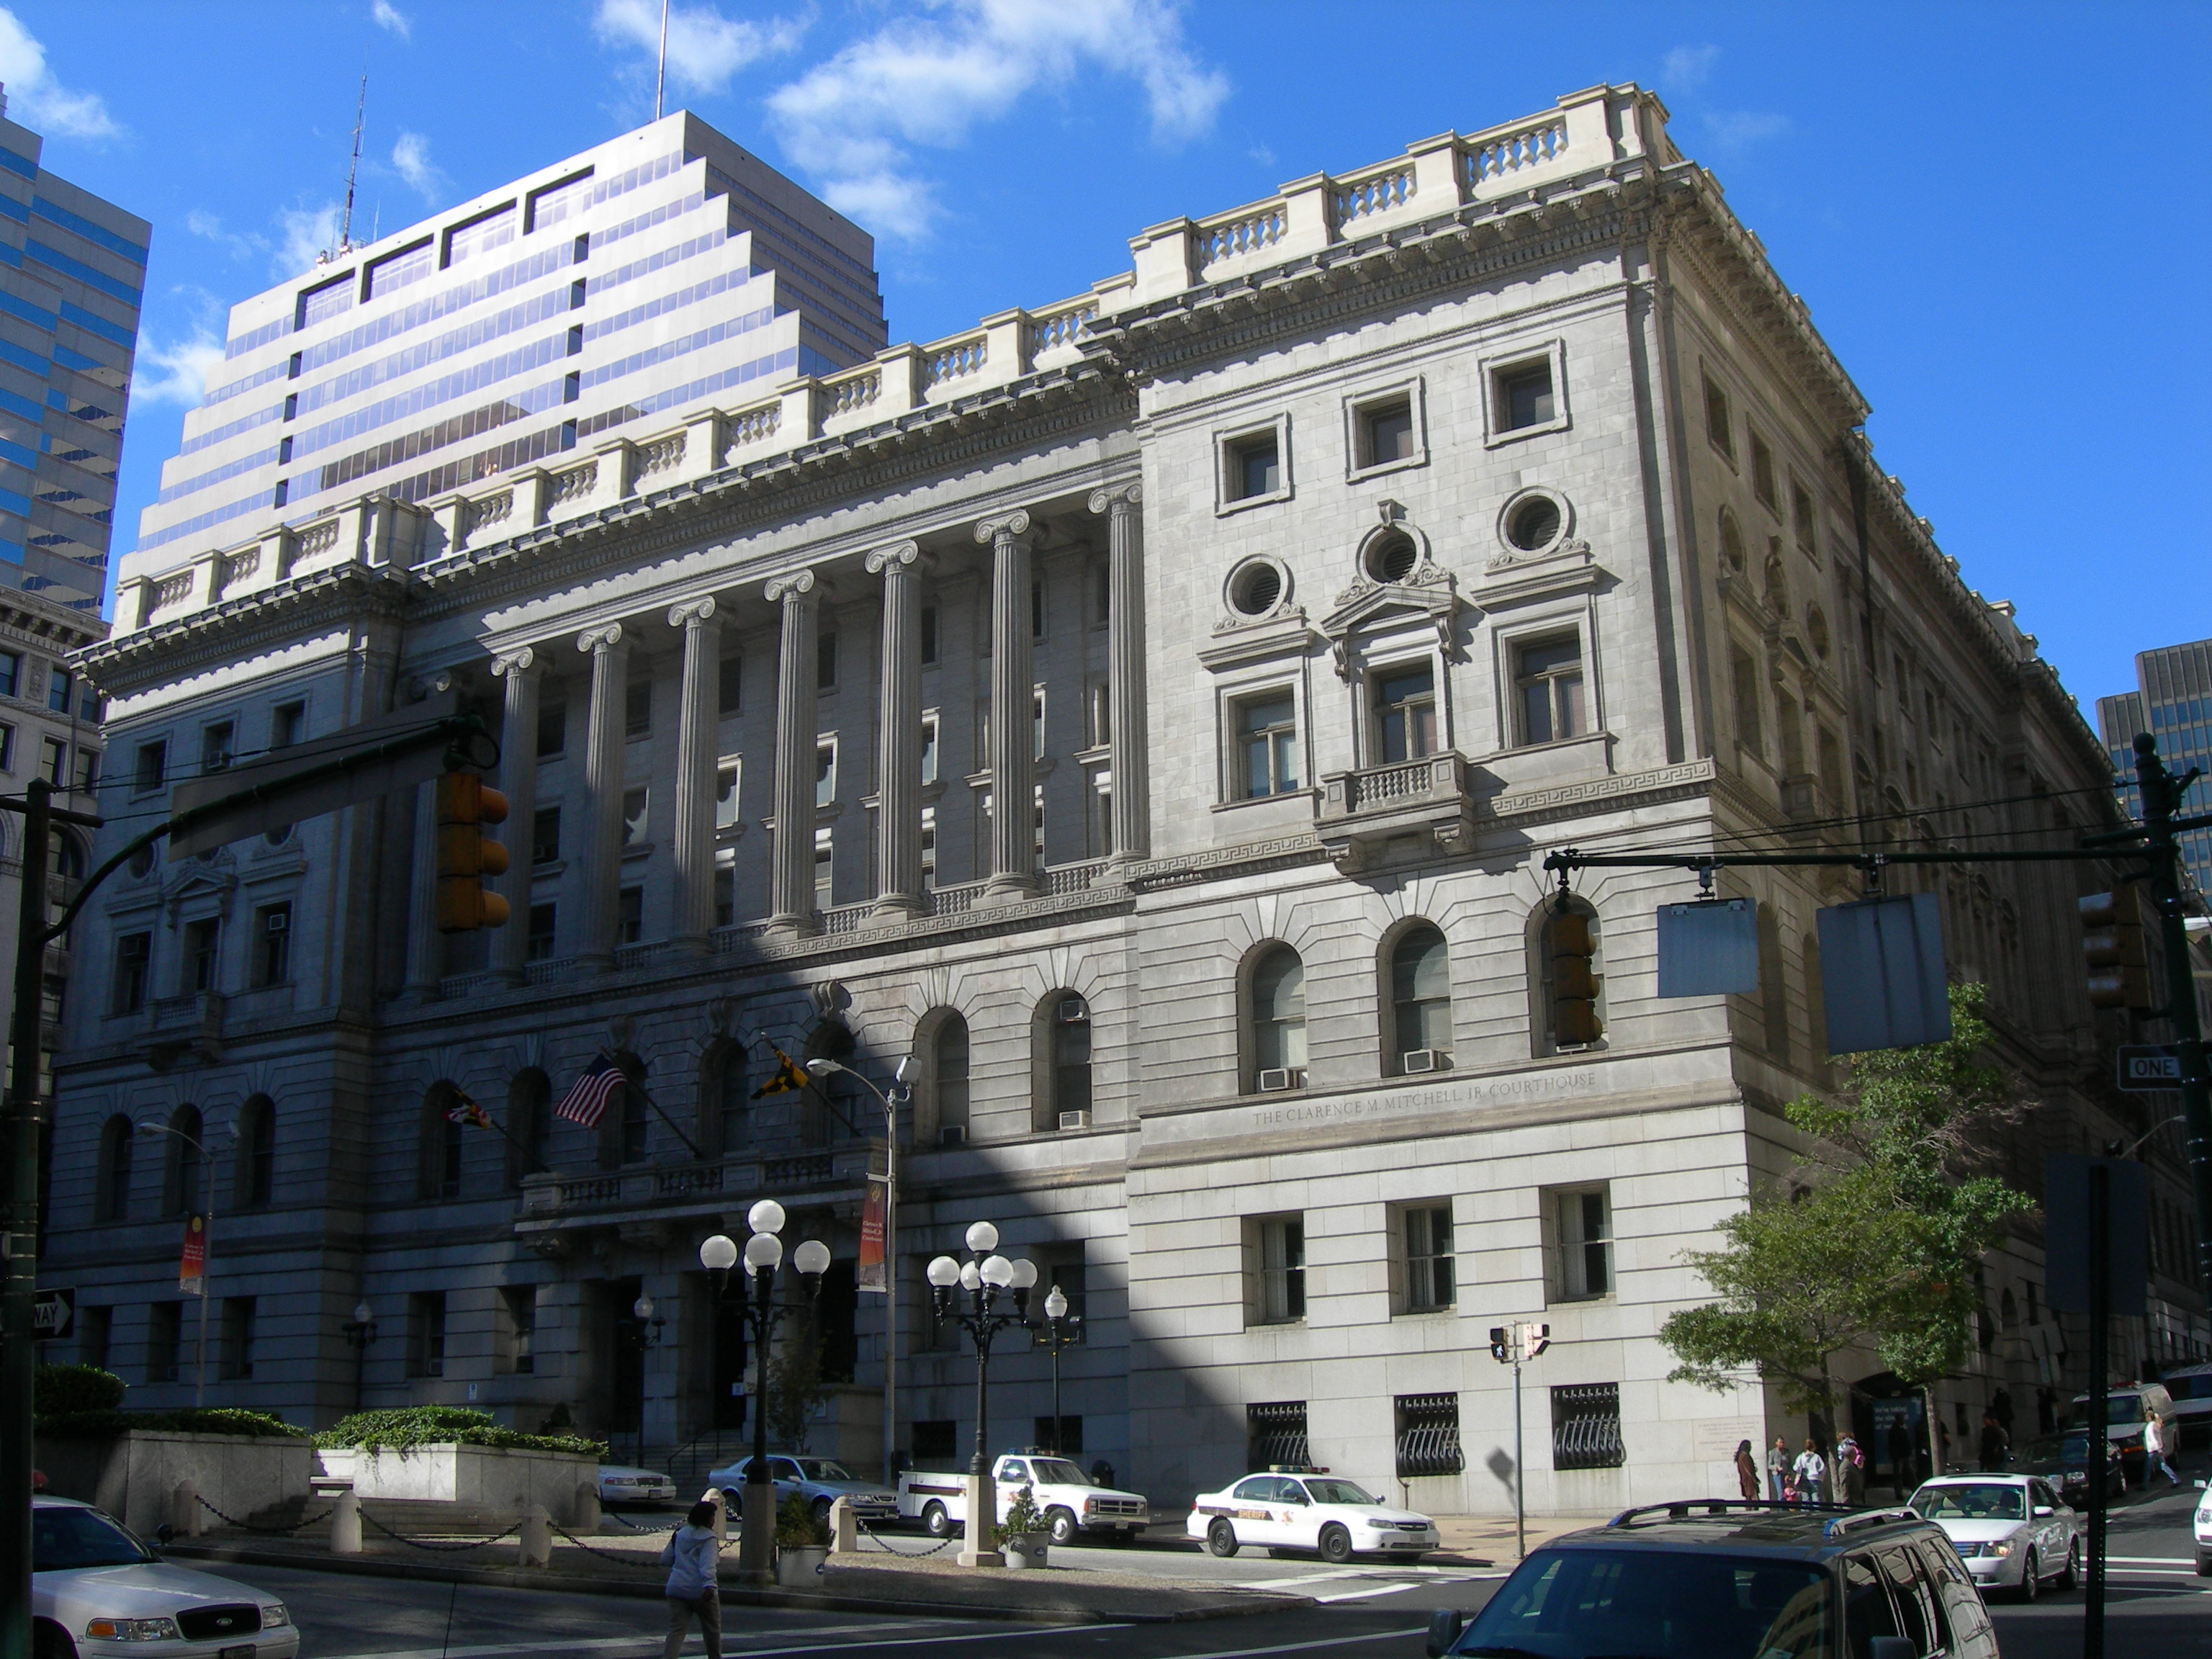 Baltimore City Courthouse. Photo credit: Jimmy Emerson, DVM via Flickr